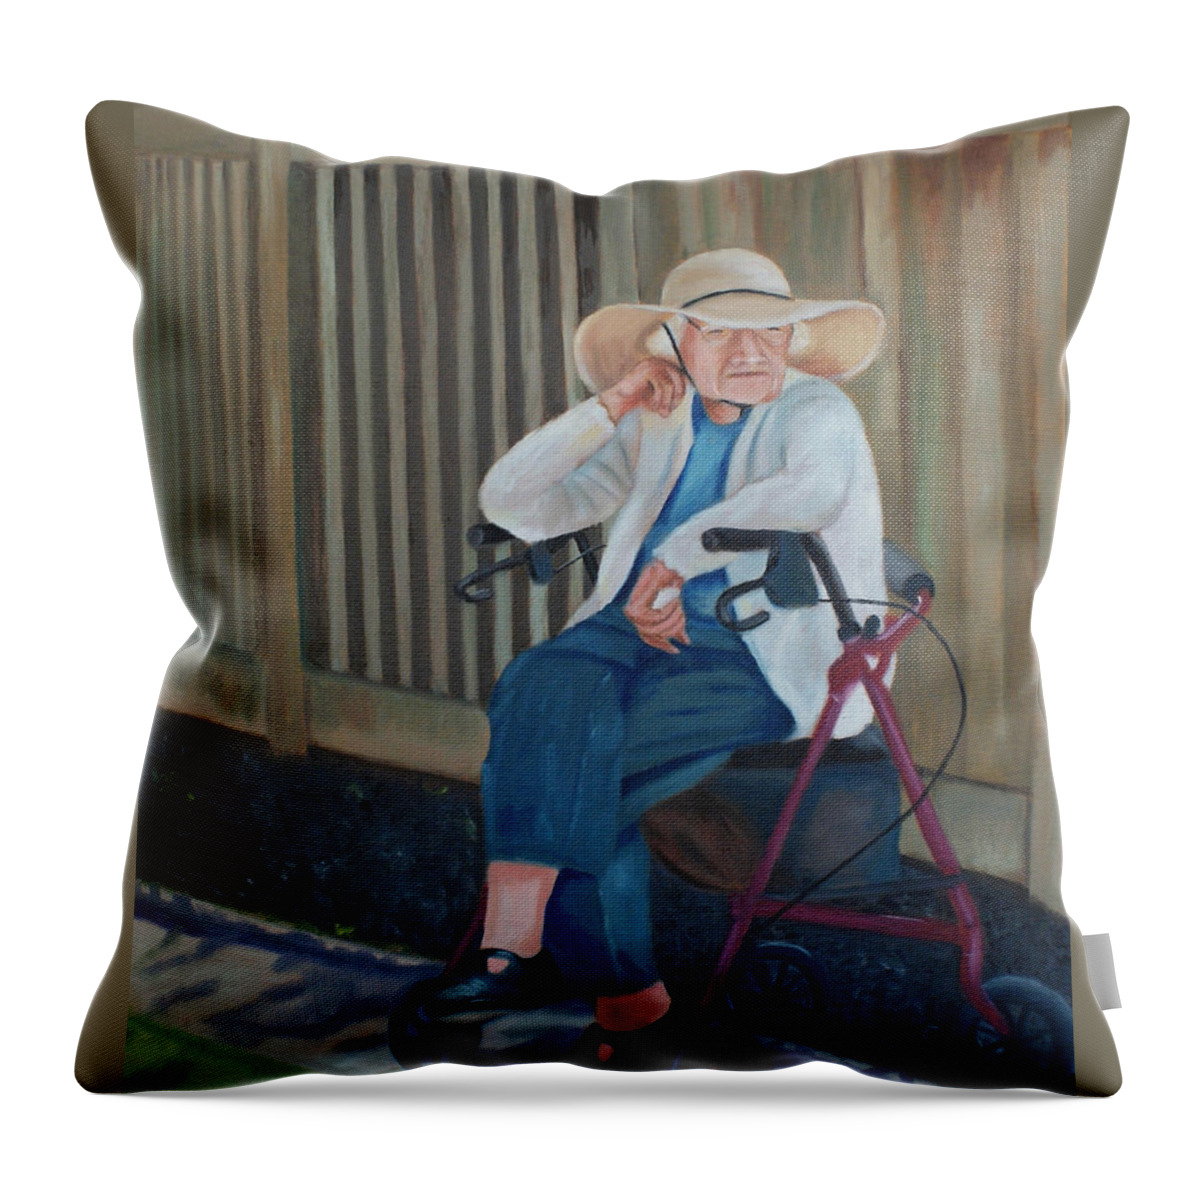 People Throw Pillow featuring the painting Waiting by Jill Ciccone Pike